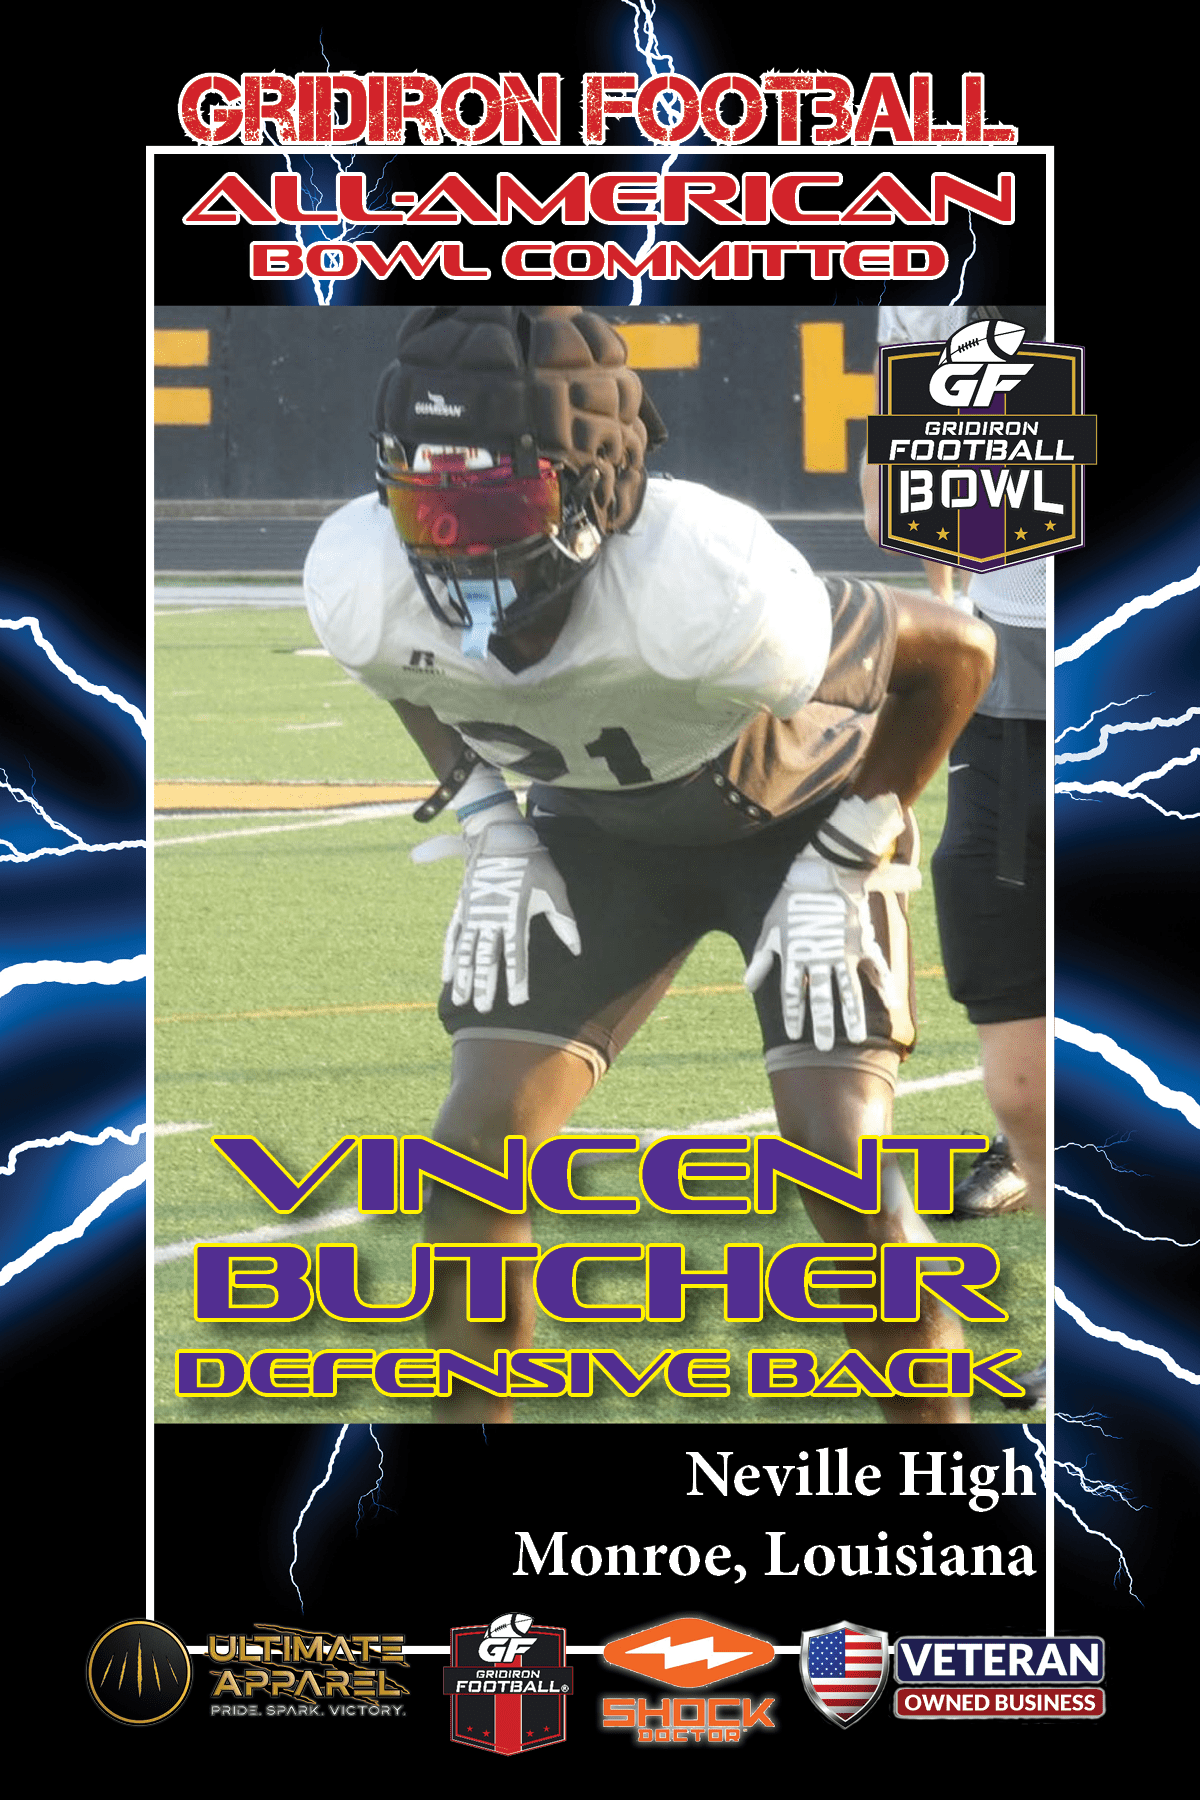 BREAKING NEWS: Neville High School (Monroe, La.) DB Vincent Butcher, Jr. commits to fifth annual Gridiron Football All-American Bowl